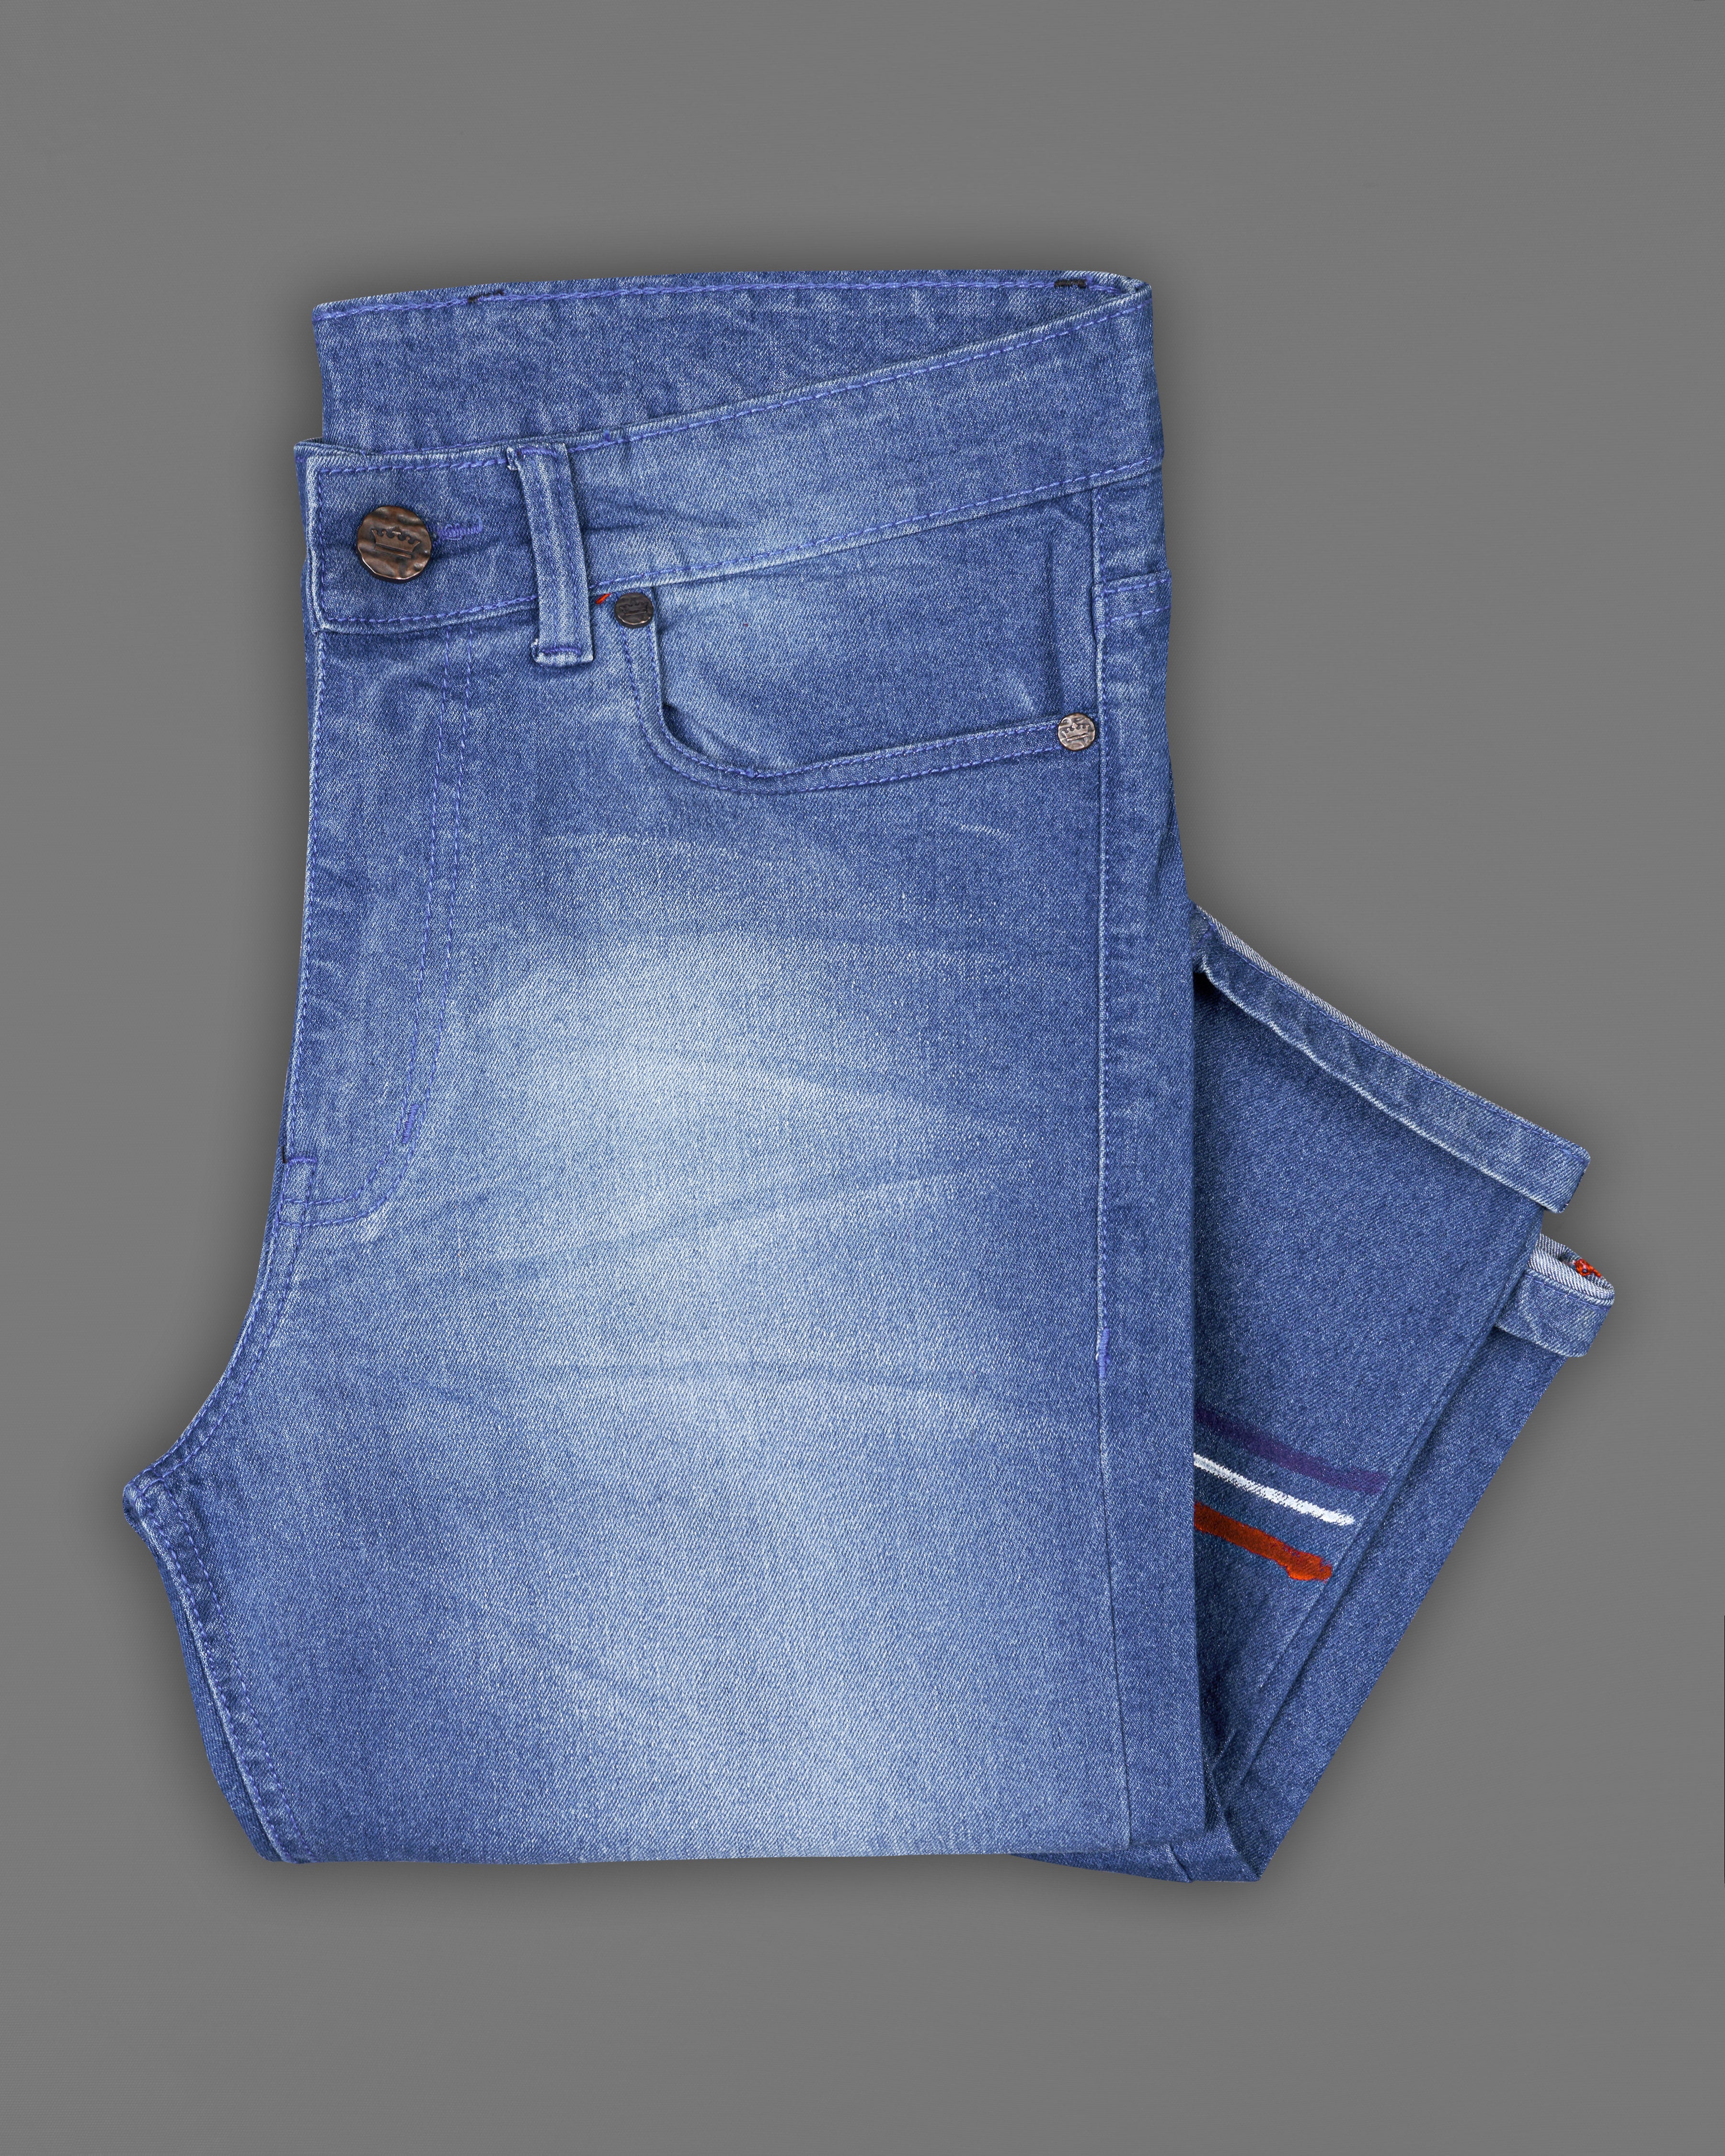 Glaucous Blue Airplane Hand-Painted Stone Washed Denim J092-ART-32, J092-ART-34, J092-ART-36, J092-ART-38, J092-ART-40